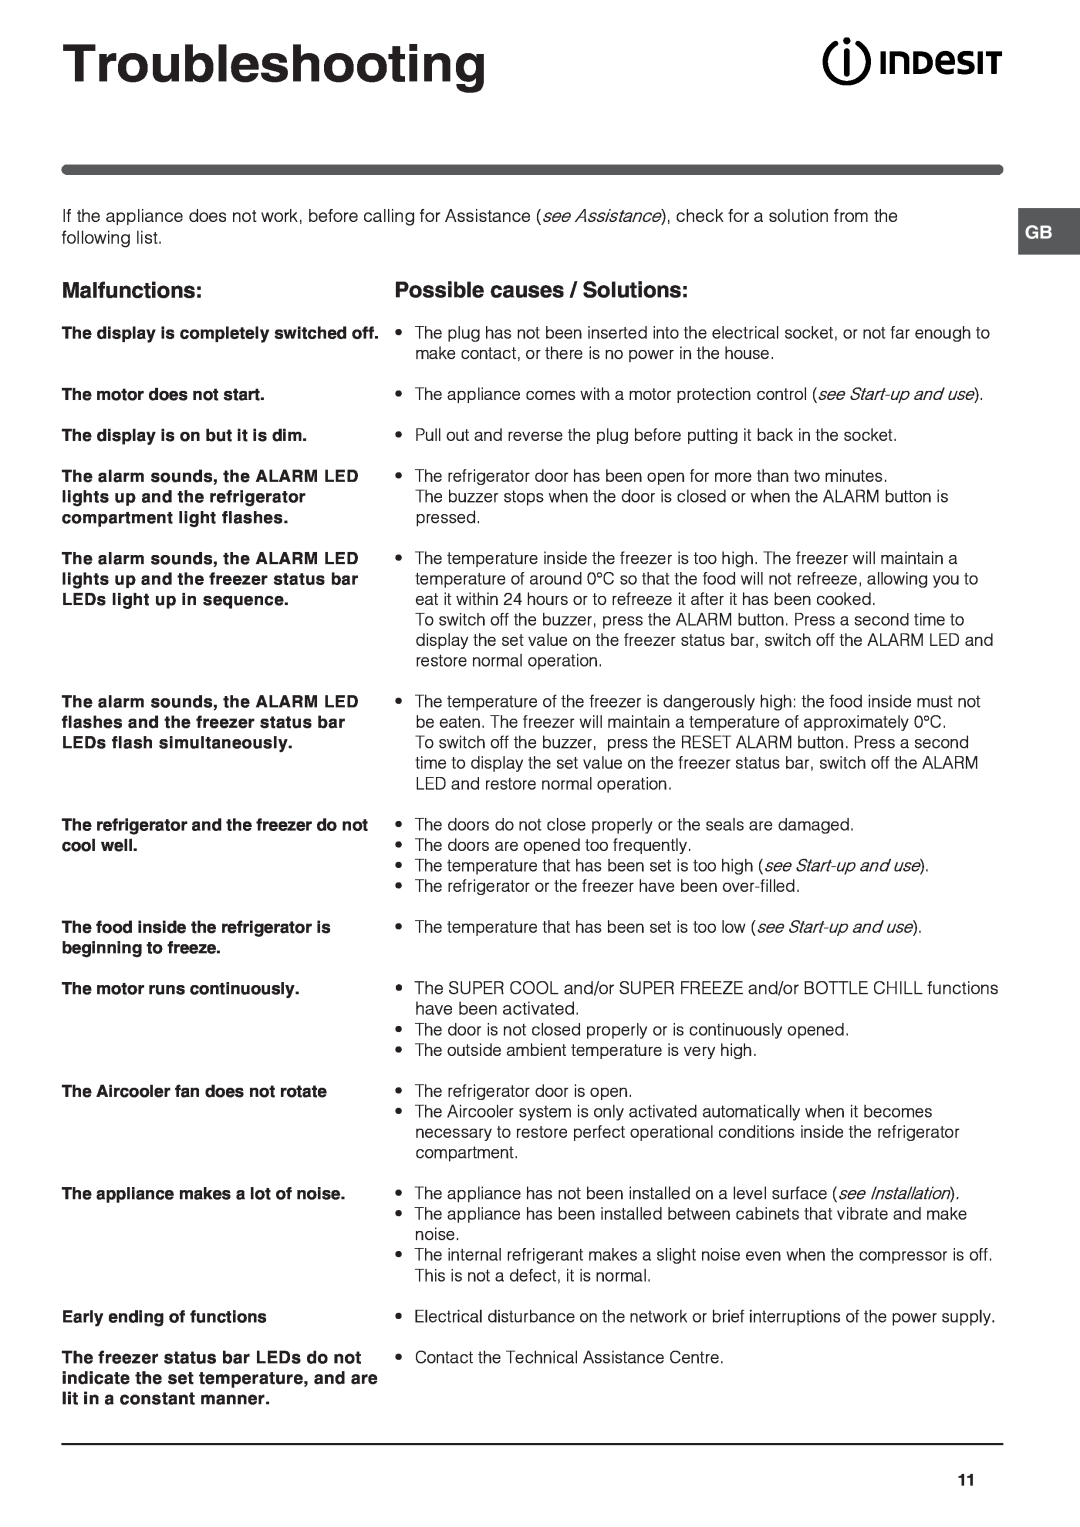 Indesit Refrigerator manual Troubleshooting, Malfunctions, Possible causes / Solutions 